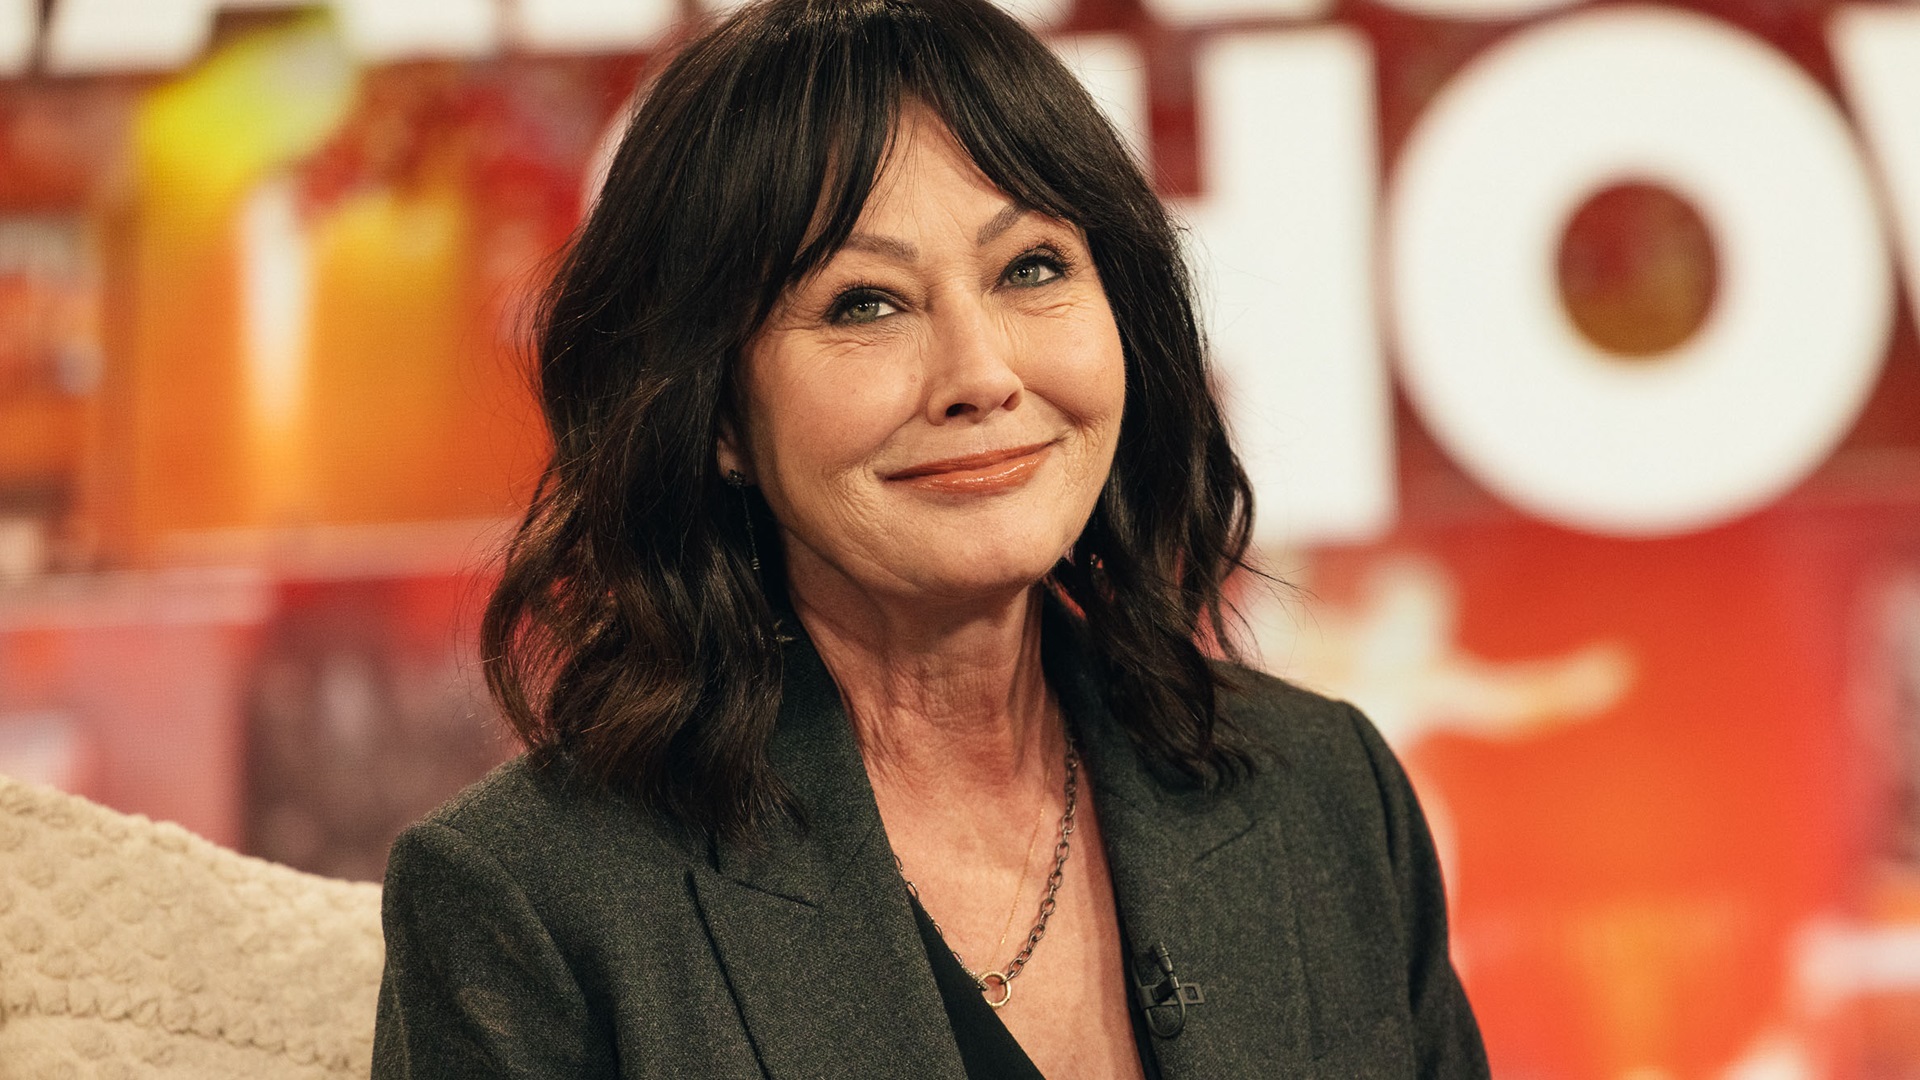 Shannen Doherty prepares for death: 'My priority at the moment is my mom'